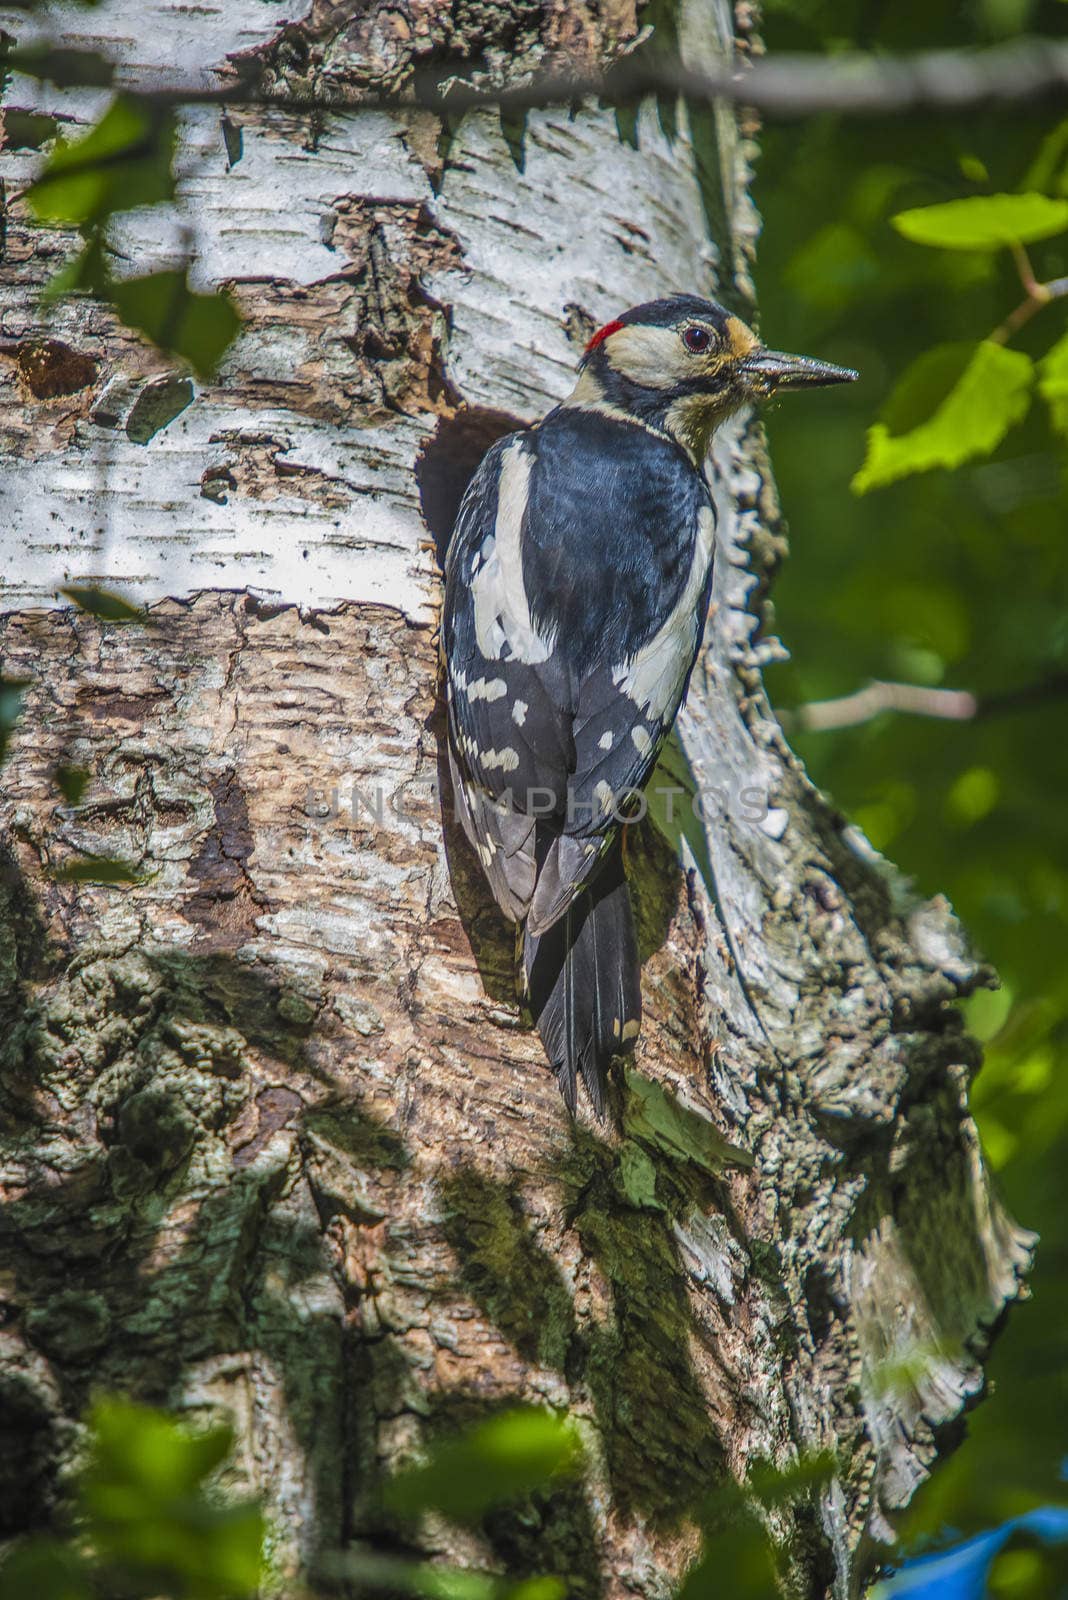 Photo was shot in a forest on Red's rock mountain in Halden, Norway and showing a great spotted woodpecker, Dendrocopos major that feeds its chicks